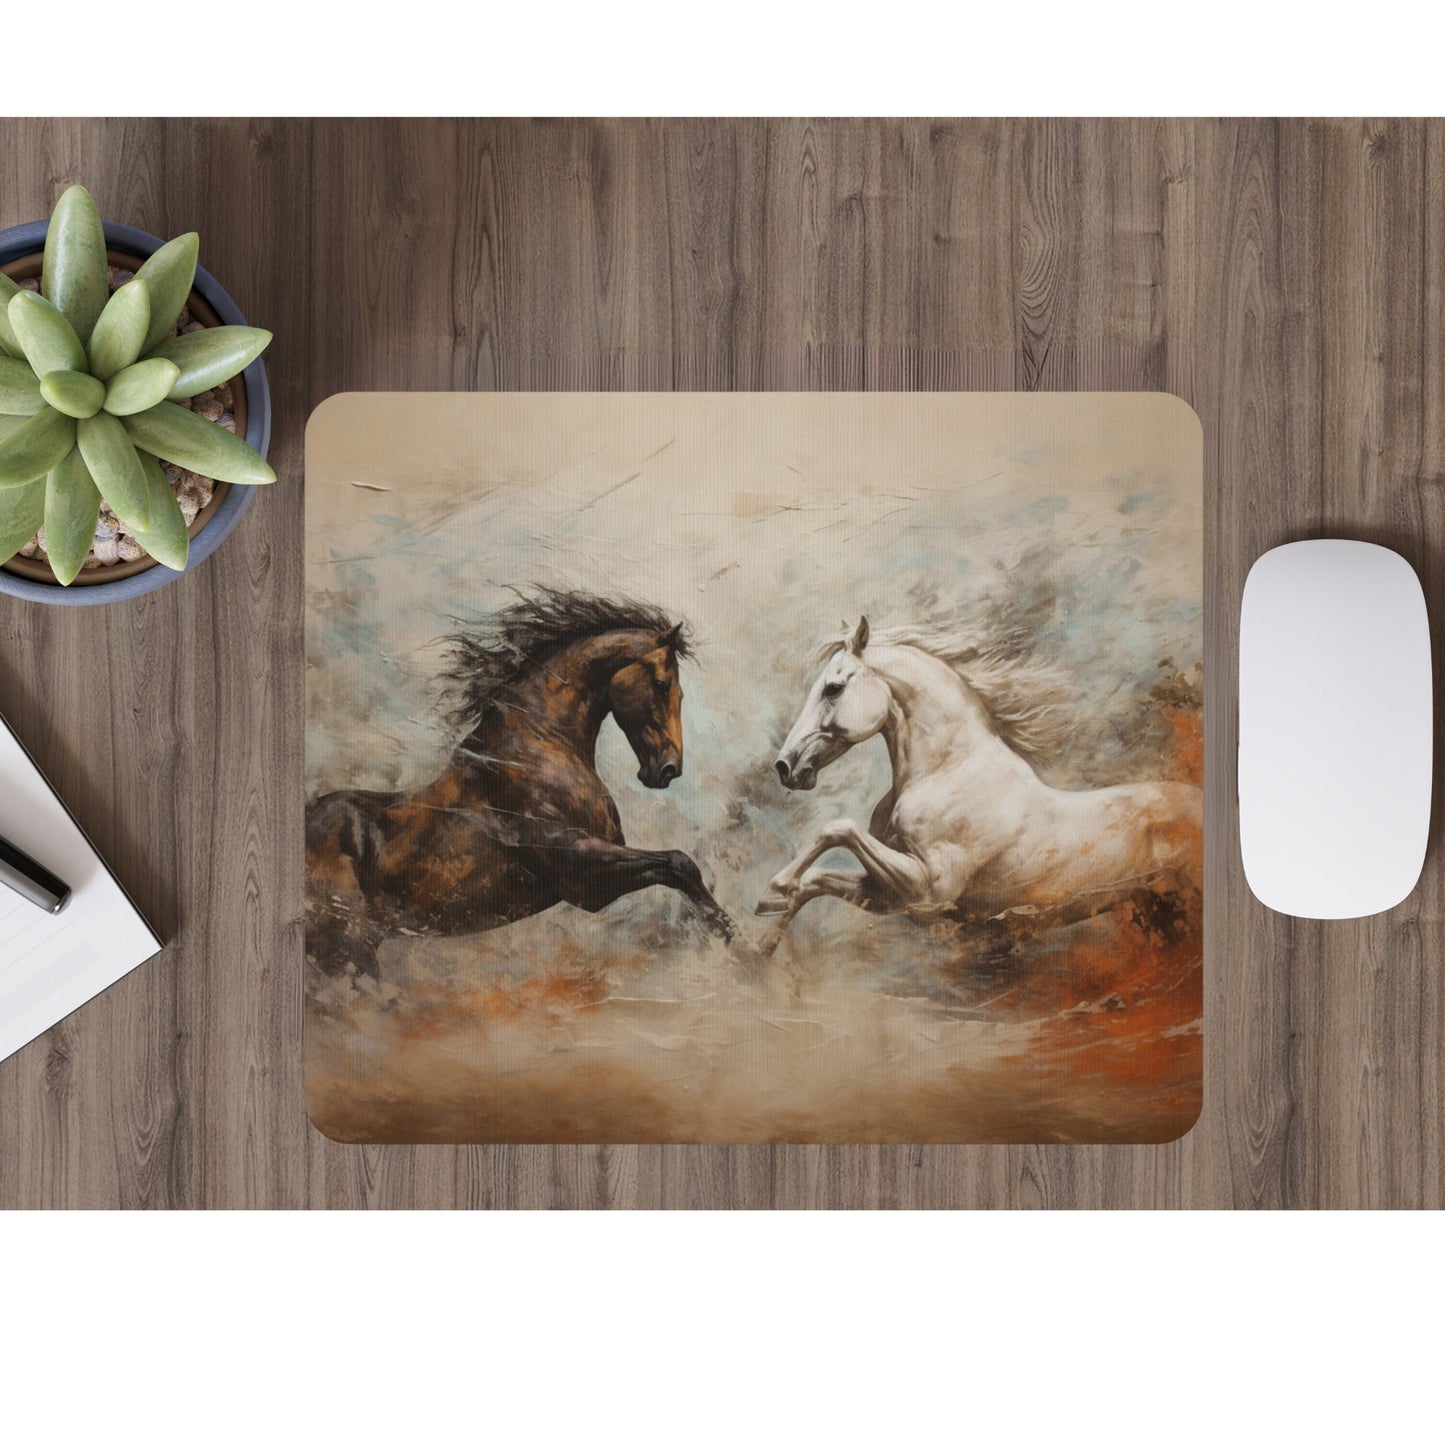 Wild Horse Mouse Pad, Personalized Horse Mouse Pad, Unique Gift Idea - FlooredByArt